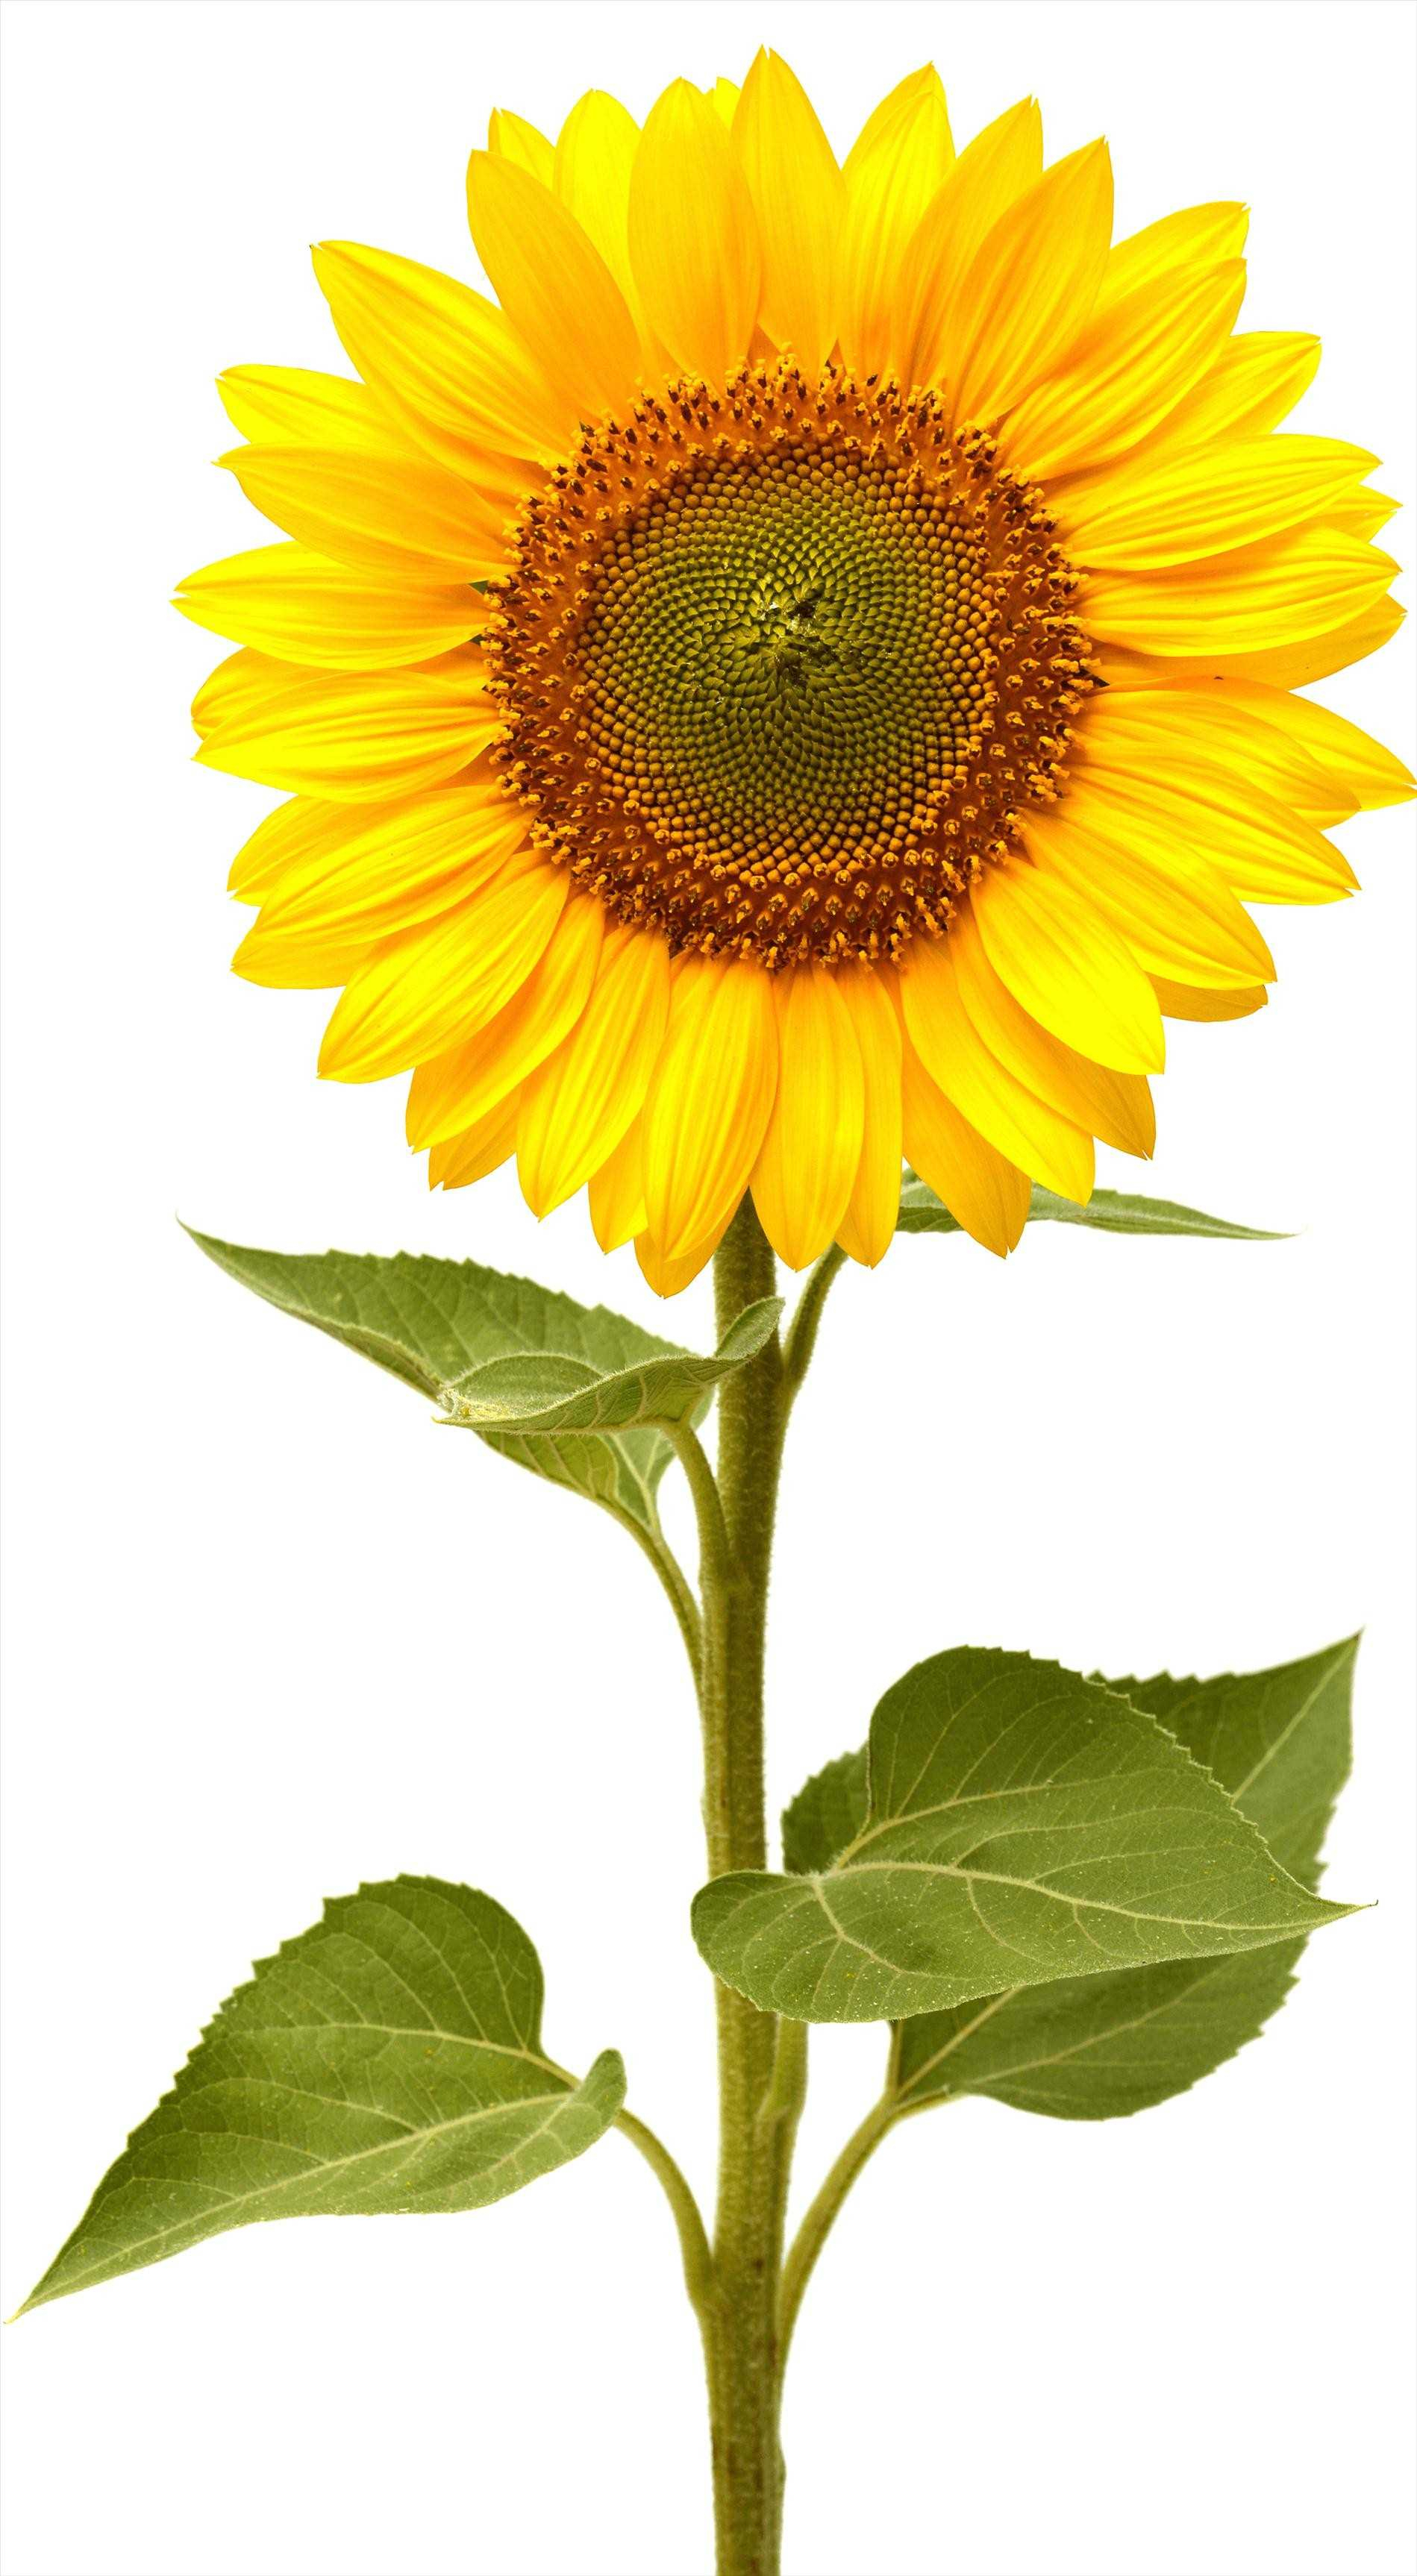 Sunflower Pencil Drawing | Free download on ClipArtMag